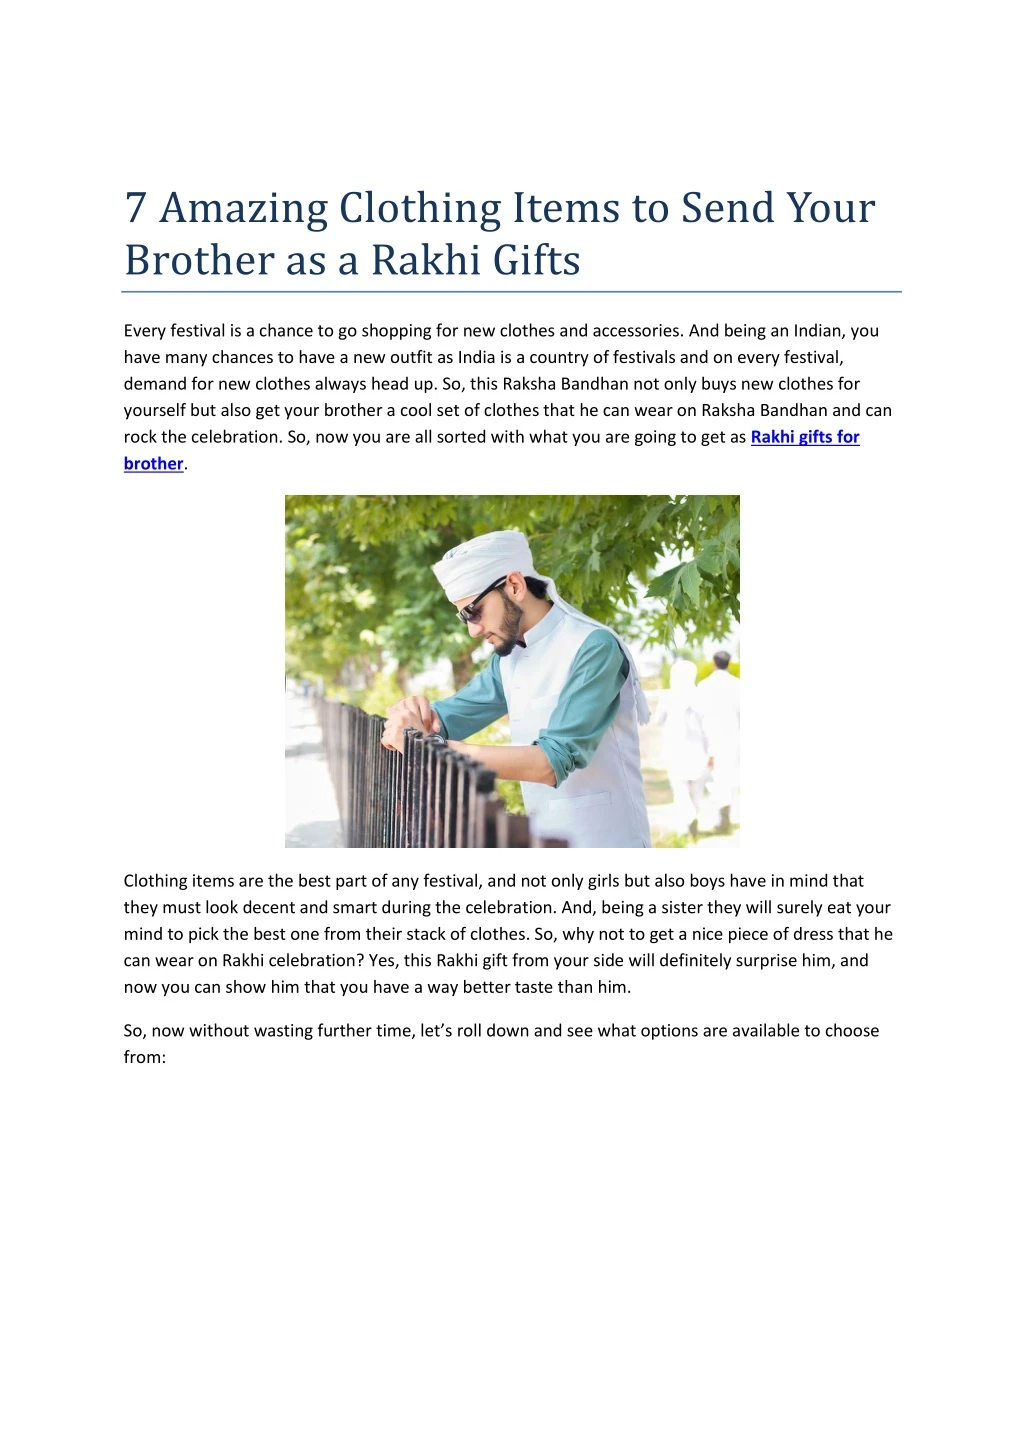 7 amazing clothing items to send your brother